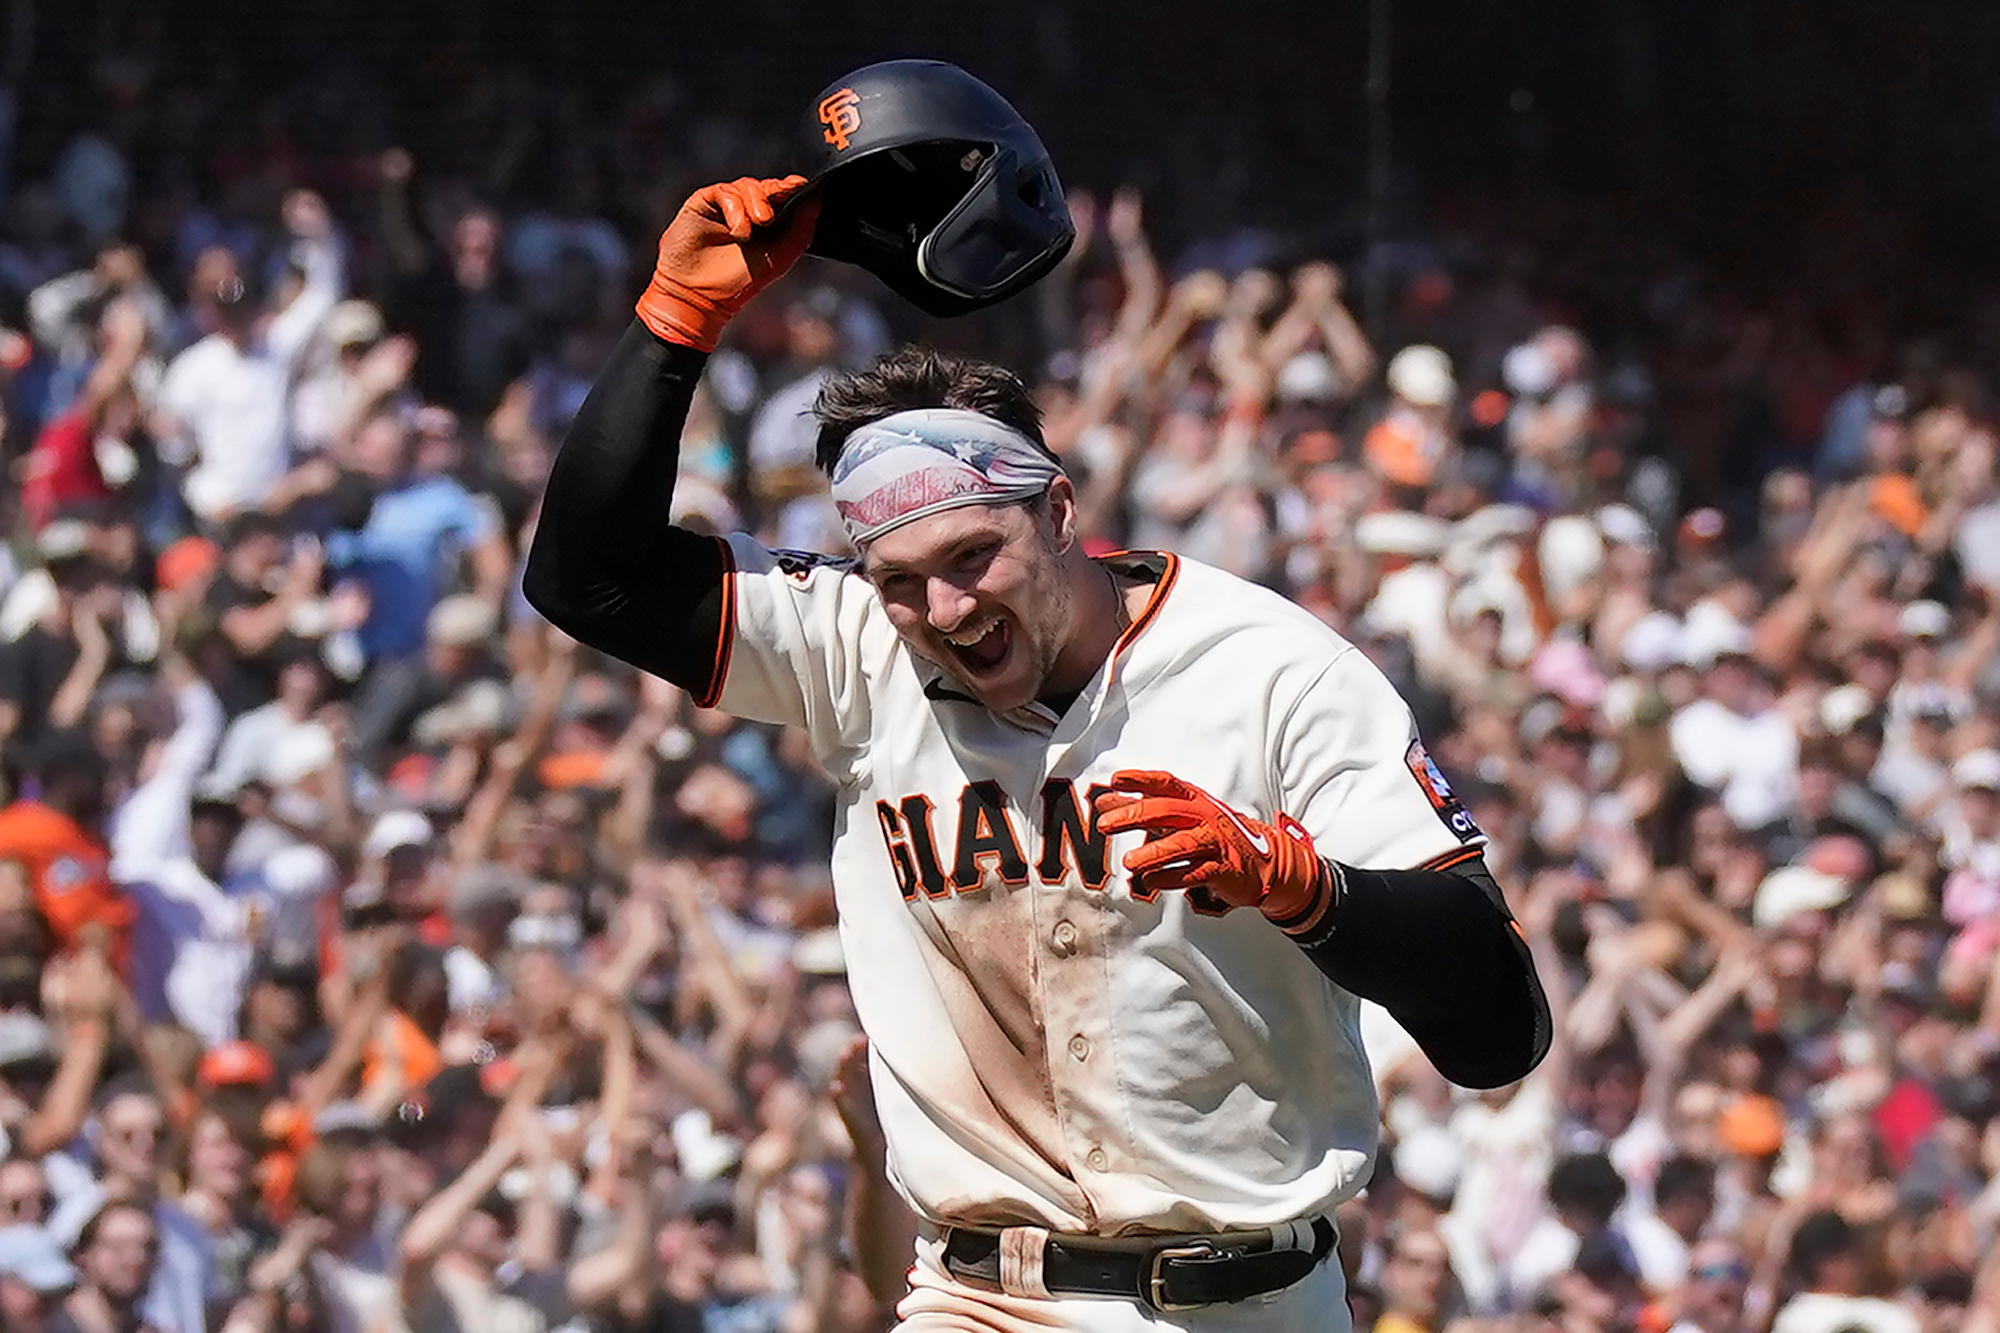 Opinion: San Francisco Giants fans leave their hearts high on a